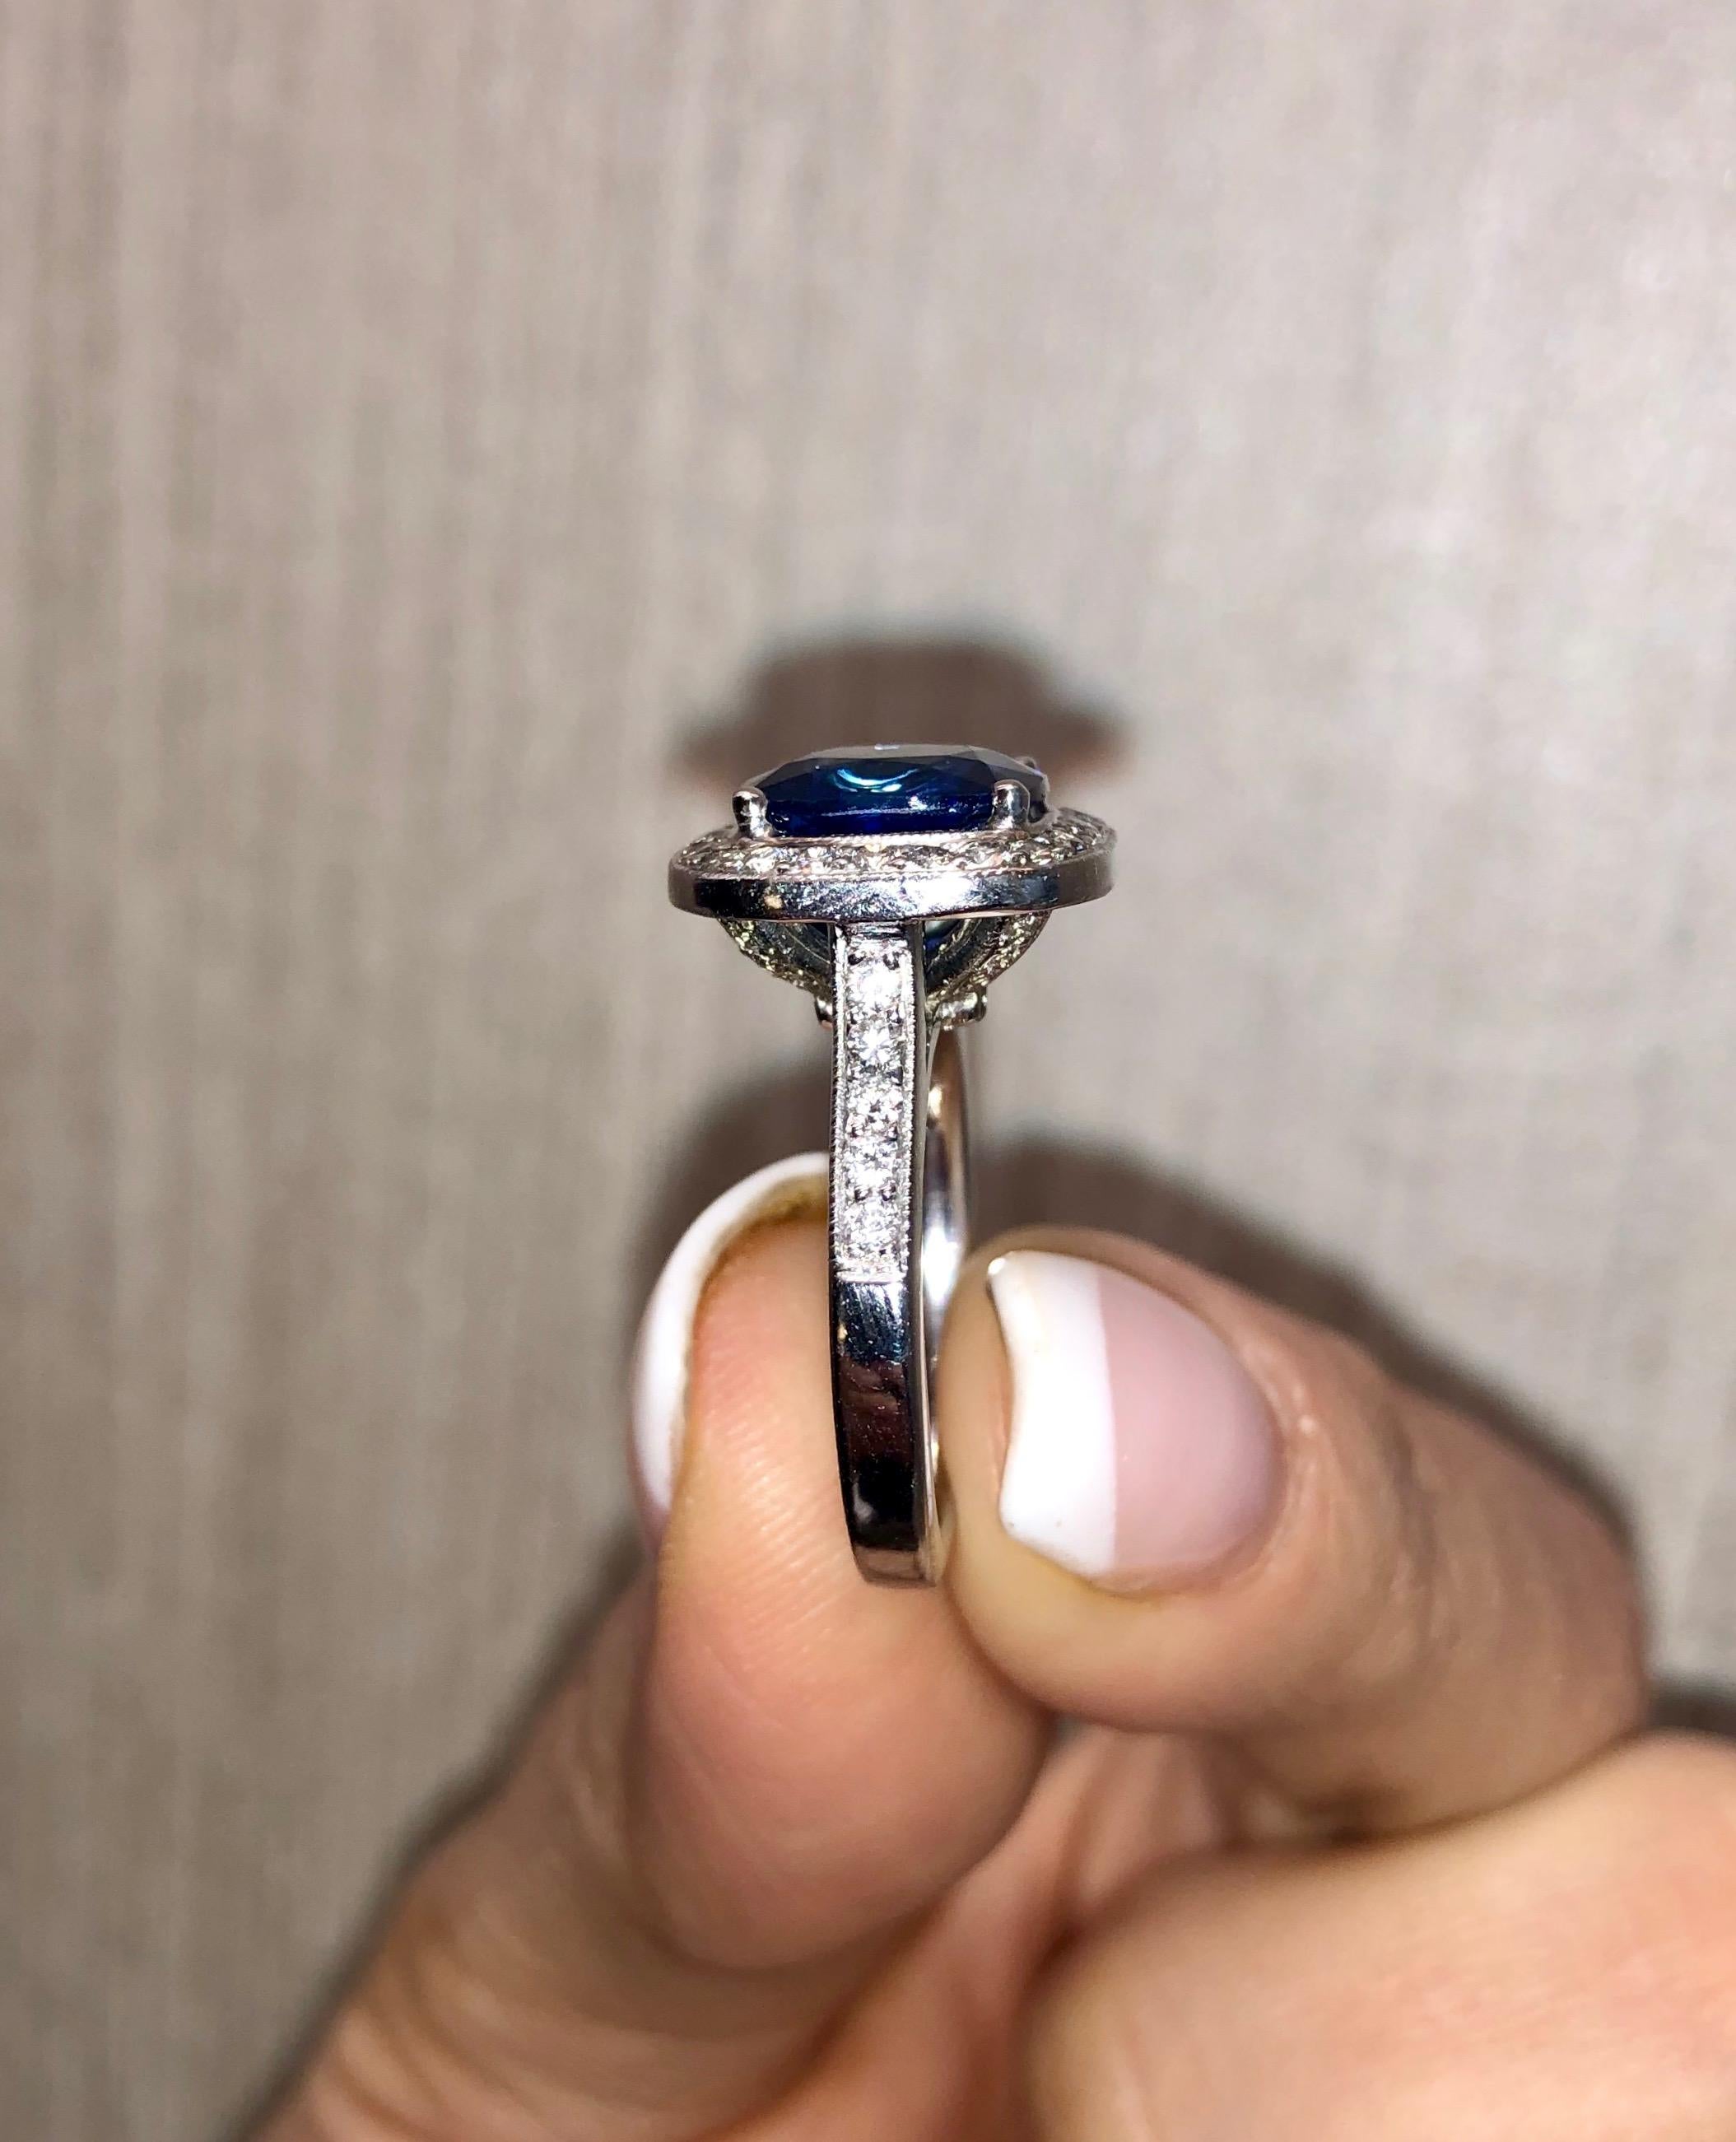 3.41 Carat Cushion Cut Natural Blue Sapphire Platinum Ring With Diamond Halo  In New Condition For Sale In Little Neck, NY